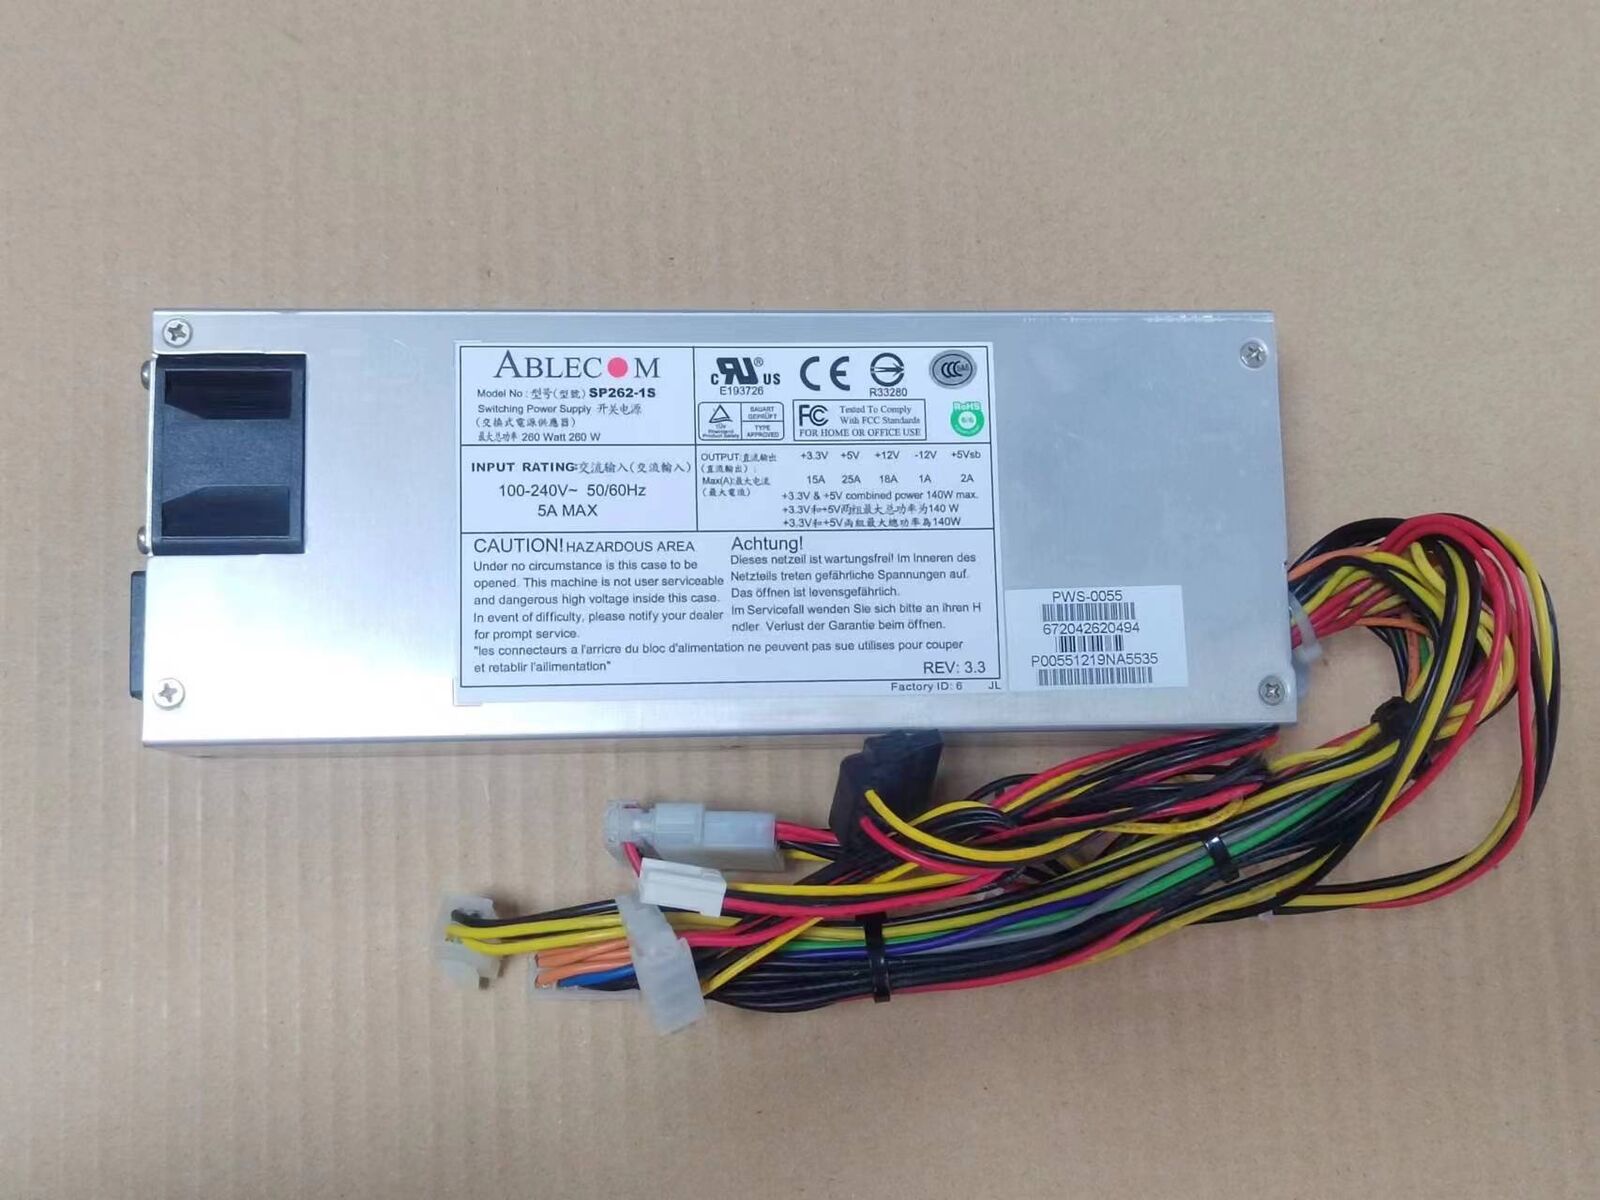 SUPERMICRO ABLECOM SP262-1S 260W 1U MULTI-OUTPUT SWITCHING POWER SUPPLY PWS-0055